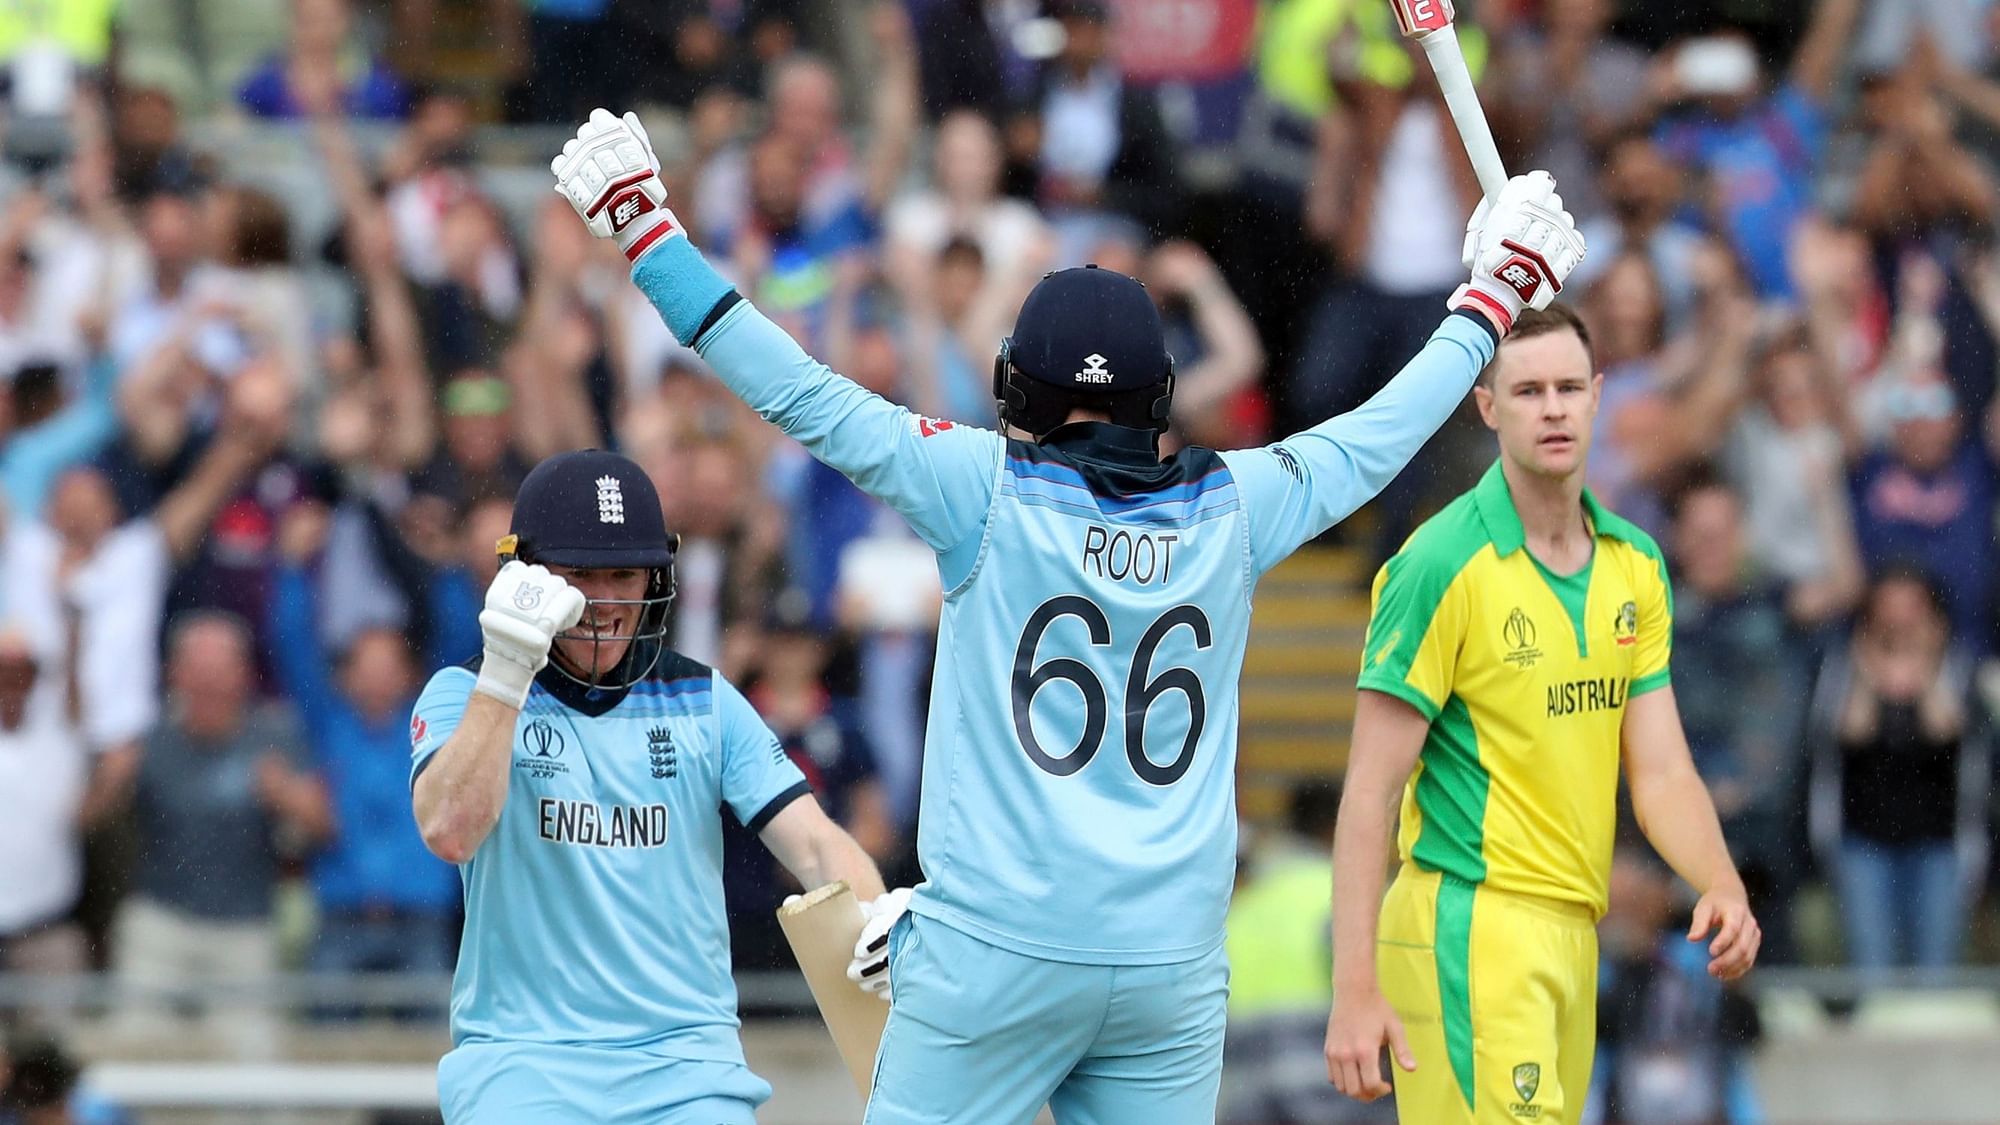 England reached its first Cricket World Cup final in 27 years by trouncing defending champion Australia.